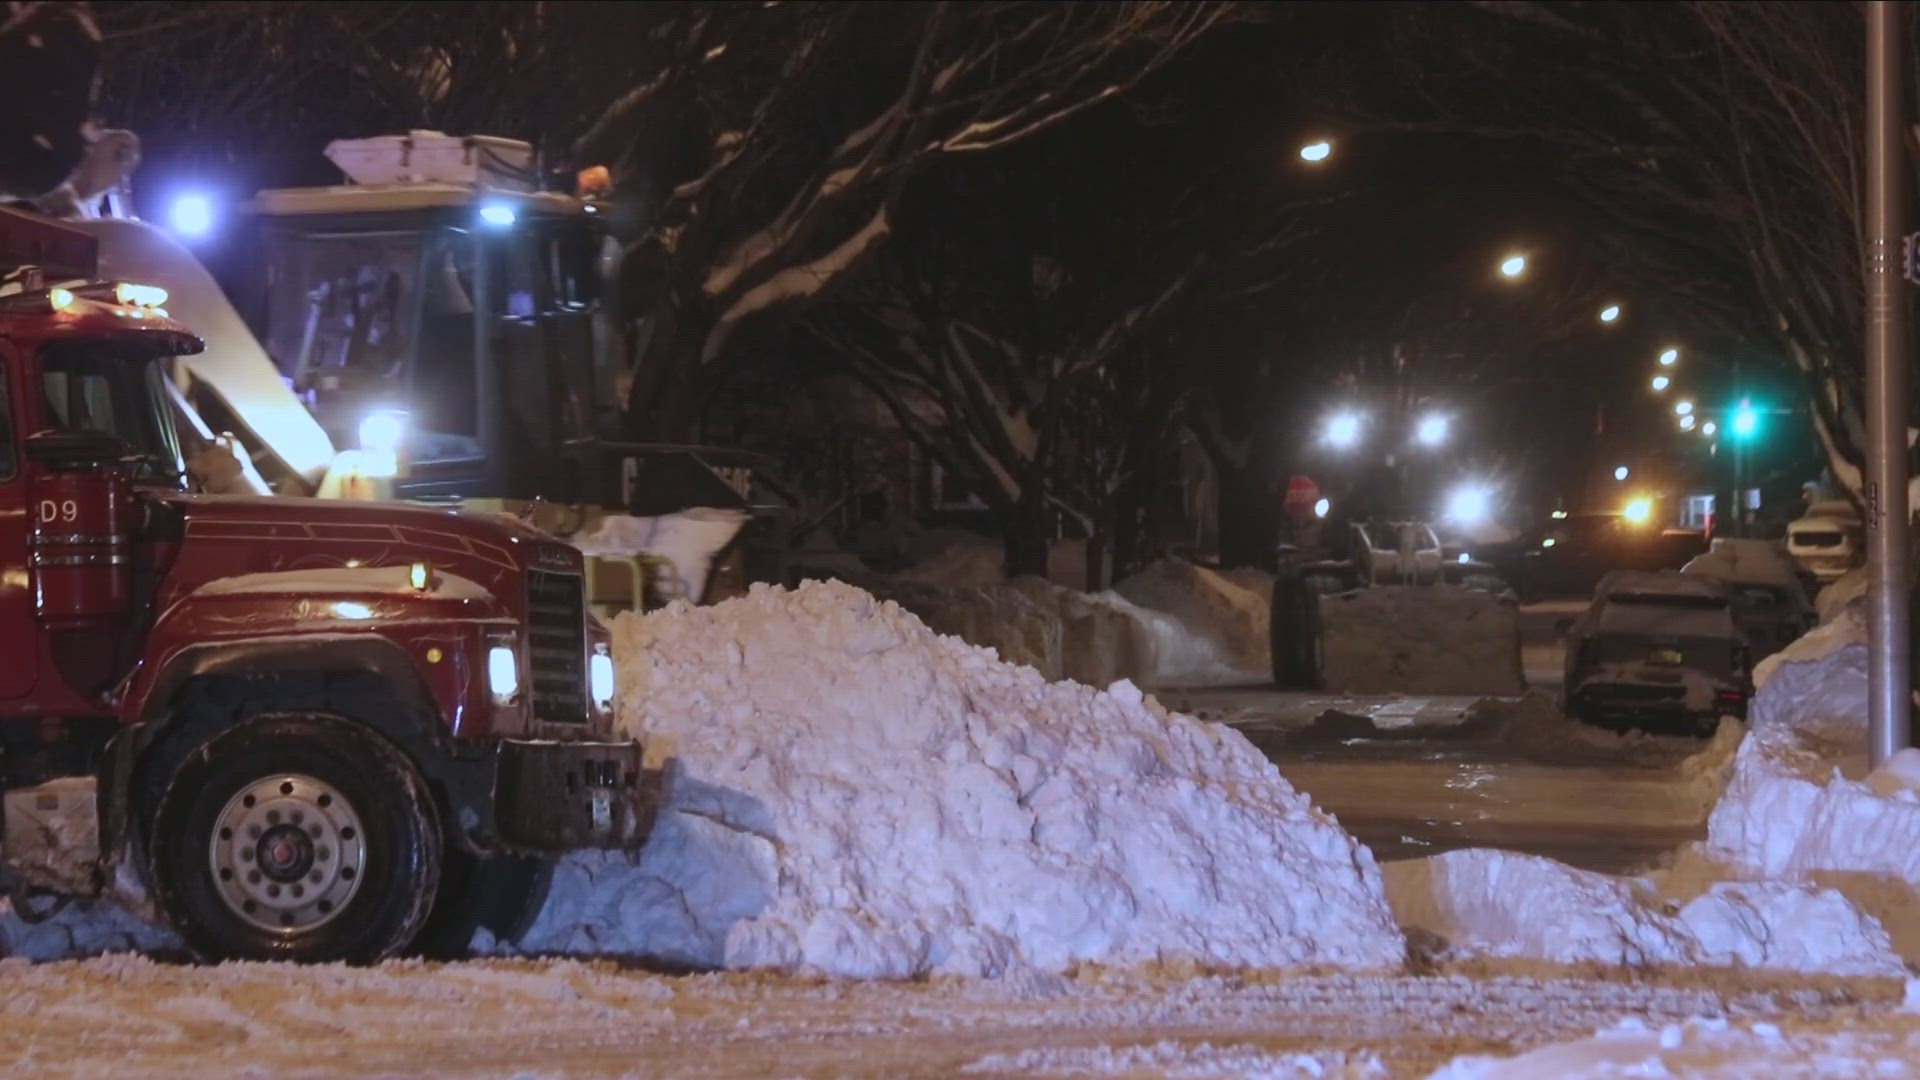 Heavy equipment is being used to scoop and remove snow from clogged streets where up to 4 feet of snow fell in the most recent lake effect storm.